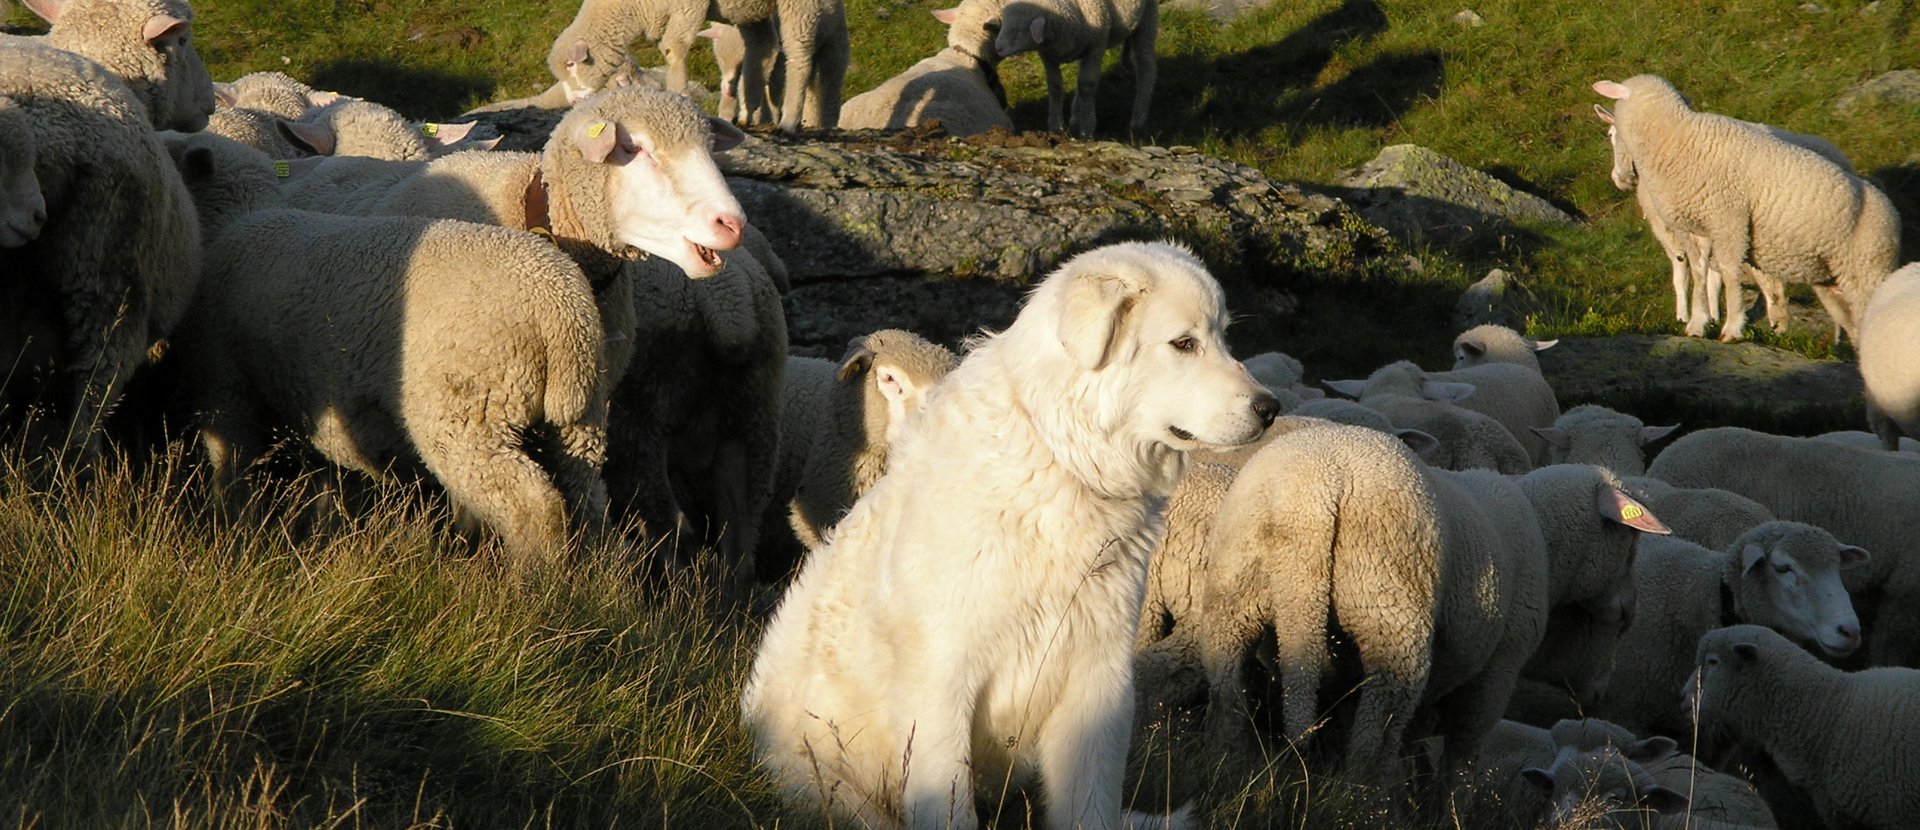 Suckler cows, Sheepdogs and Wolves